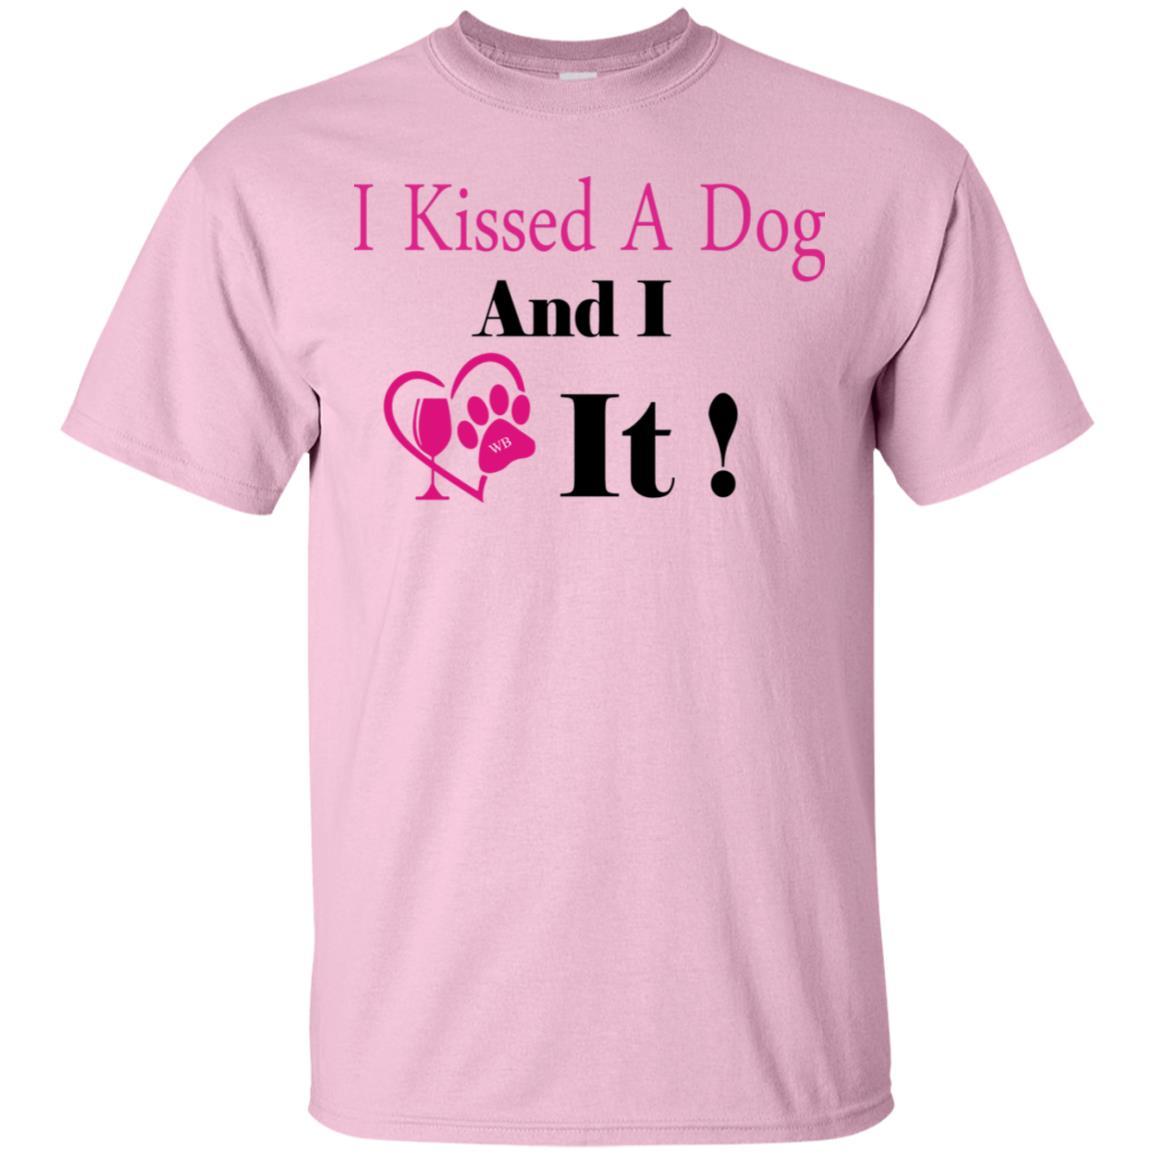 T-Shirts Light Pink / S WineyBitches.co "I Kissed A Dog And I Loved It:" Ultra Cotton T-Shirt WineyBitchesCo